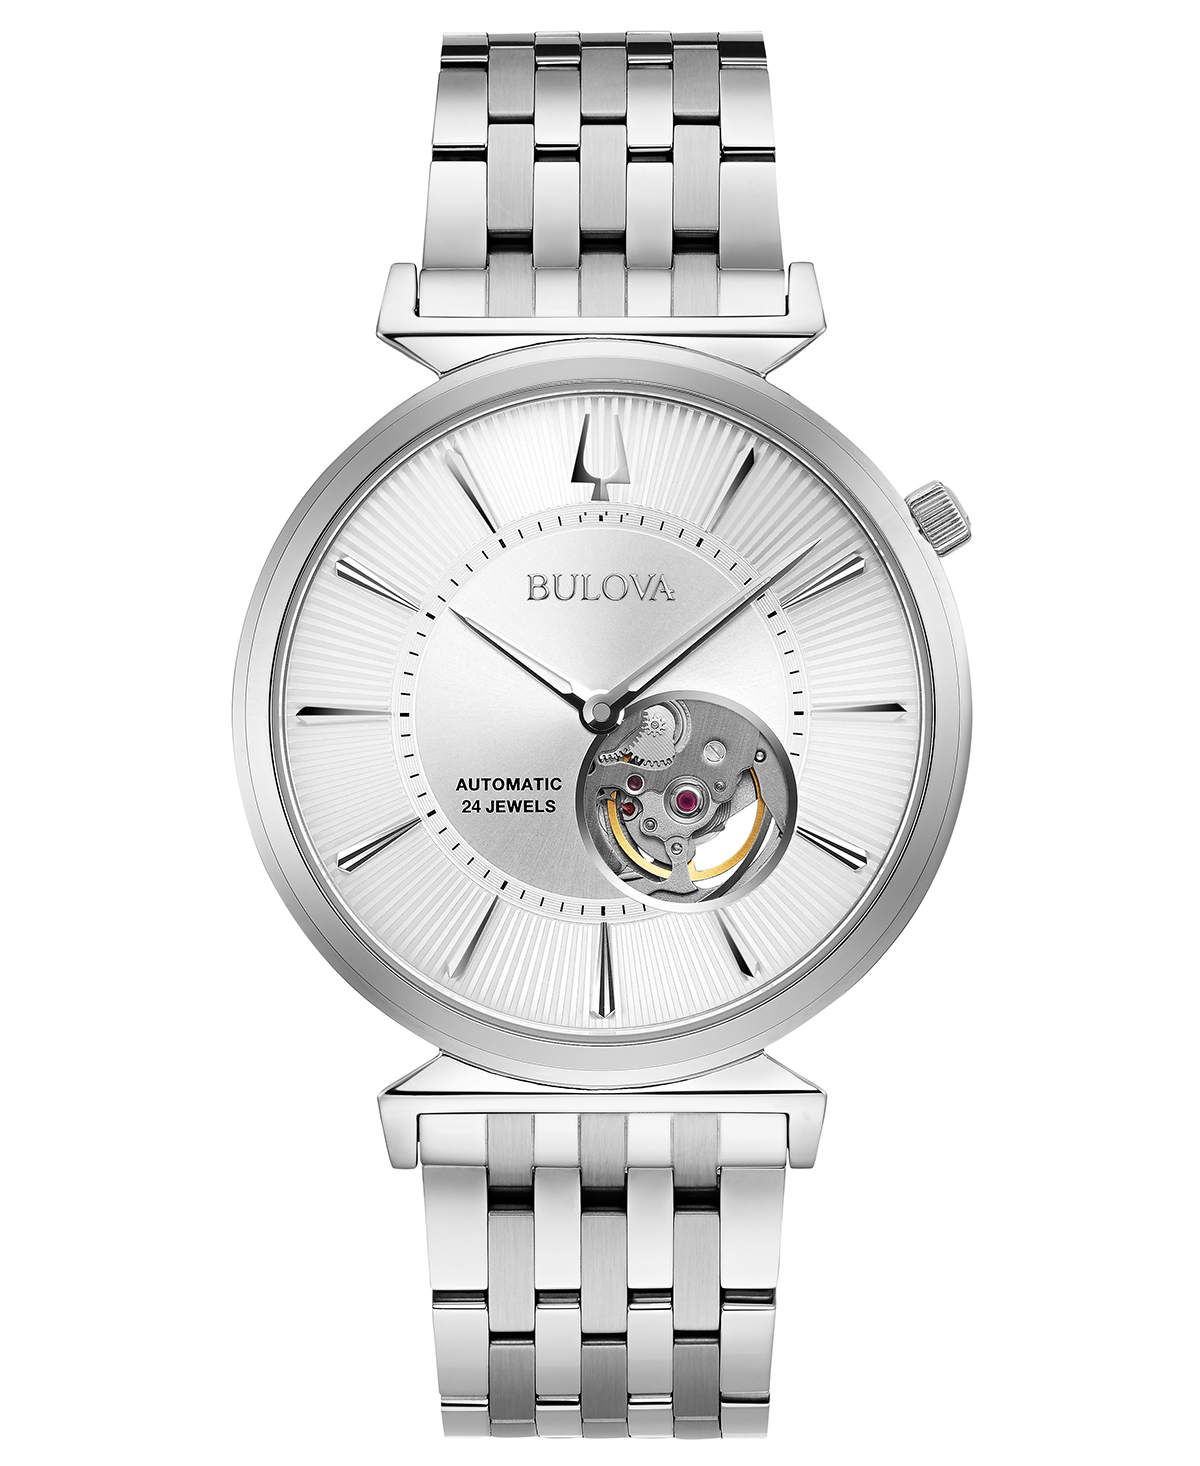 Bulova Expands Automatic Offerings With New Models In Regatta, Wilton, And Maquina Lines